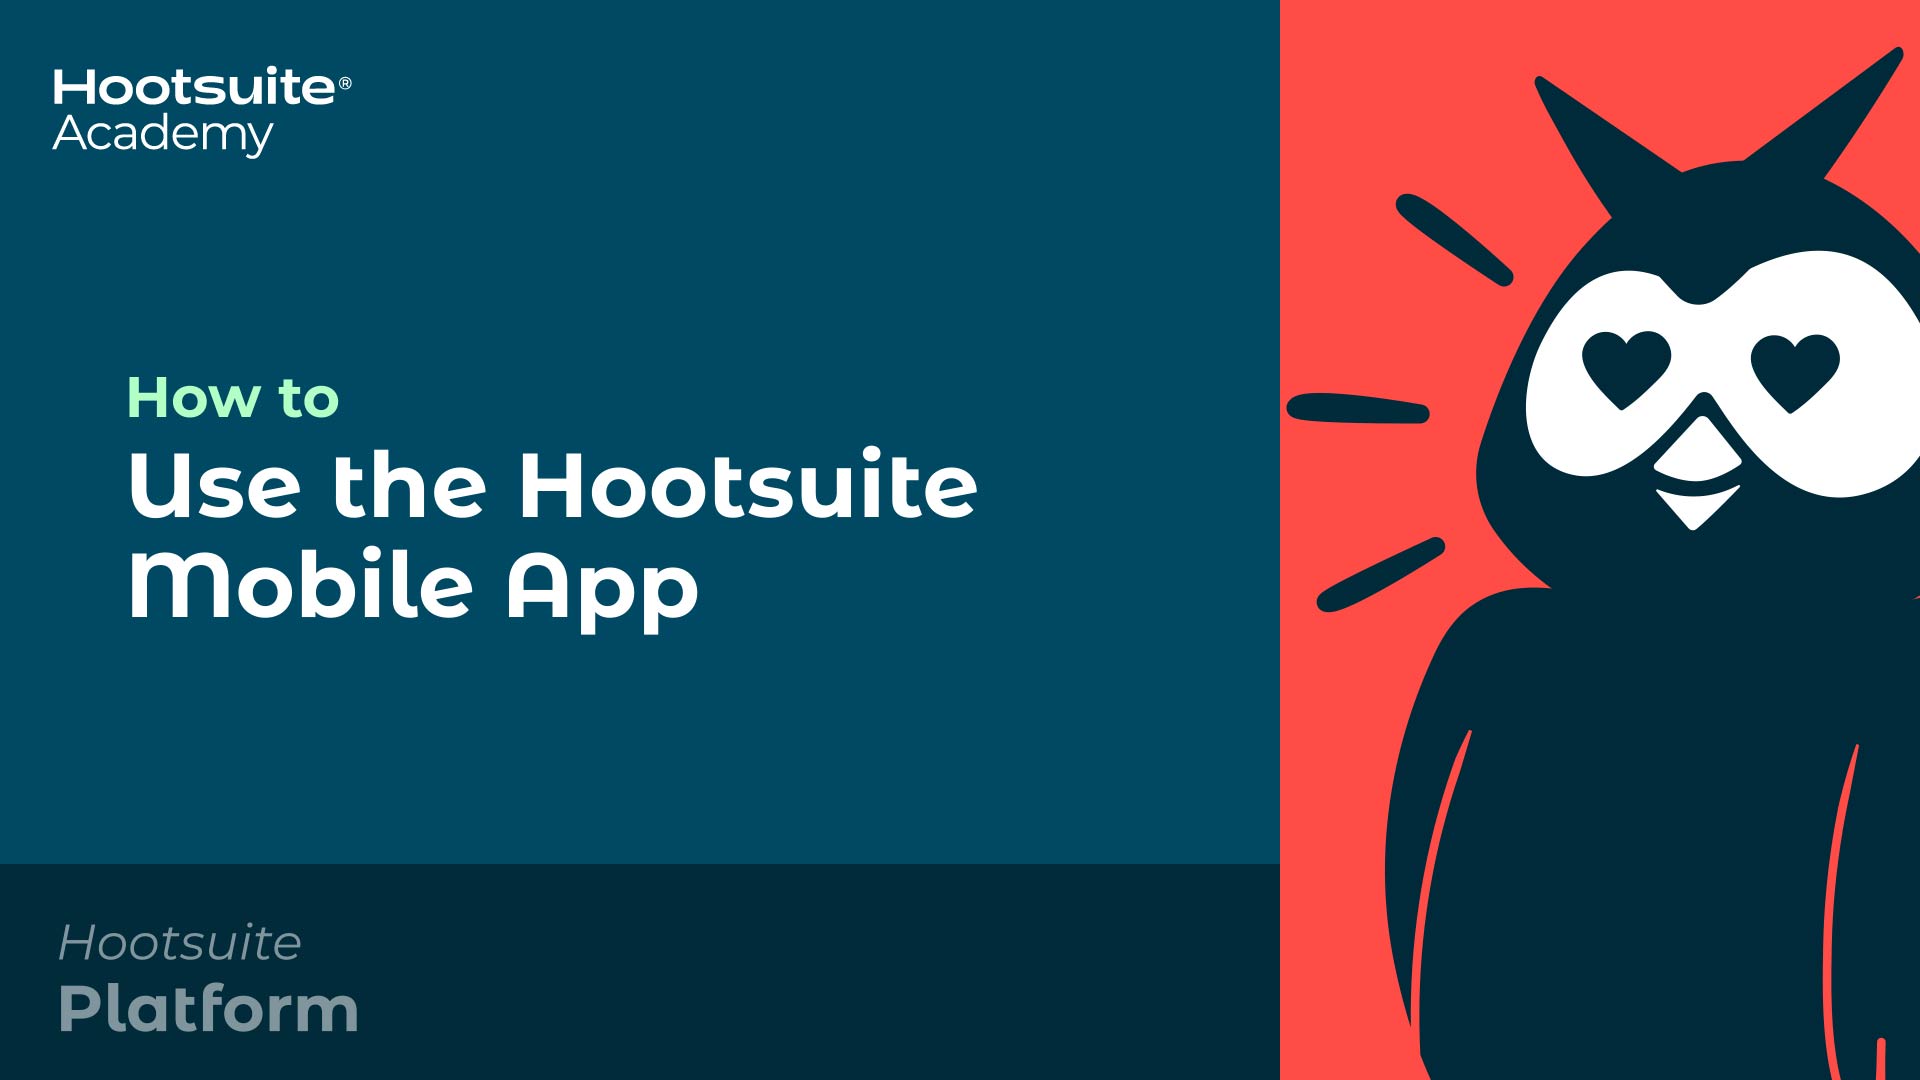 How to use the Hootsuite mobile app video